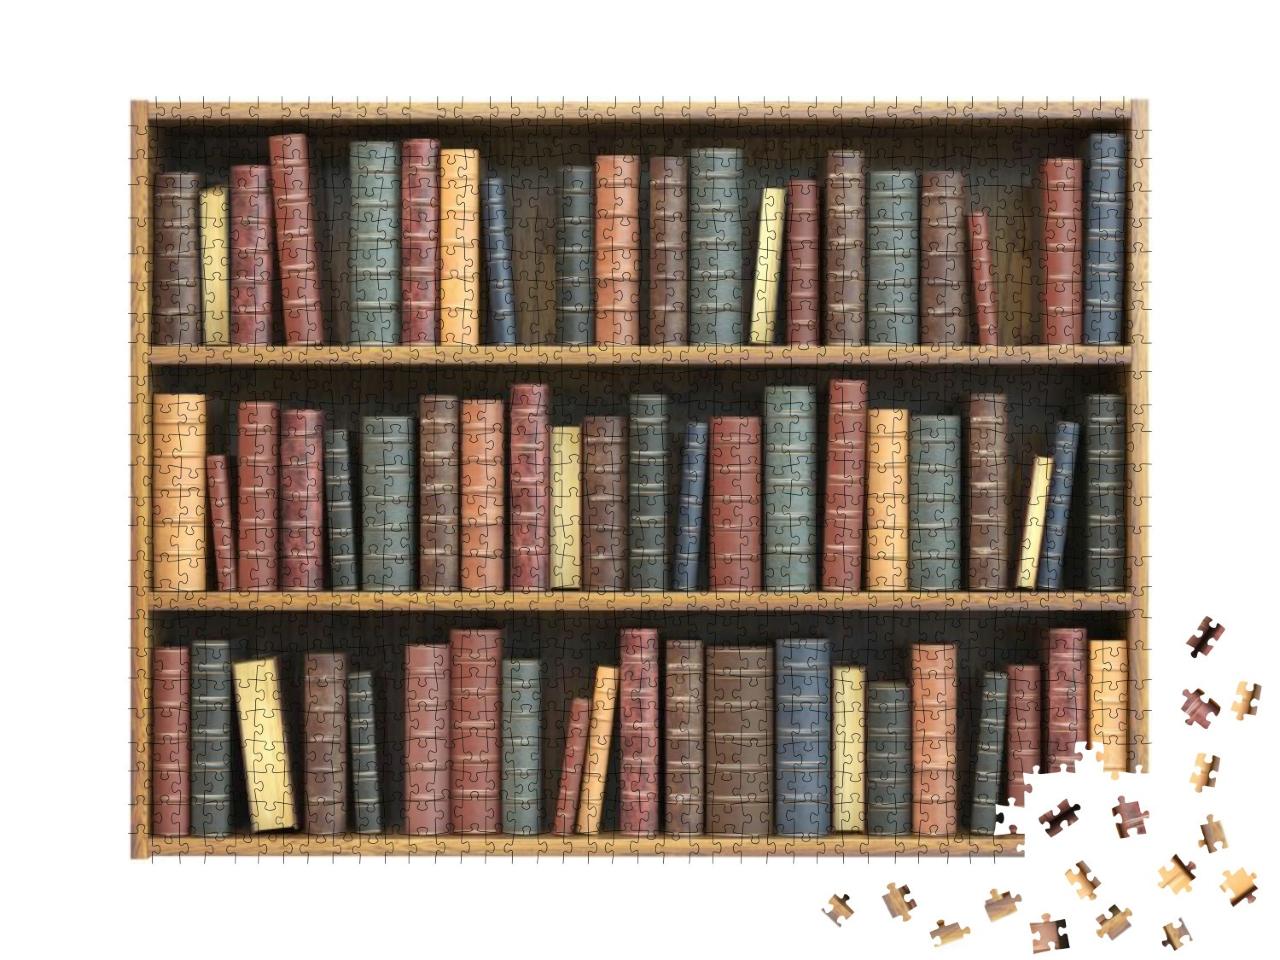 Vintage Books on Bookshelf Isolated on White Background... Jigsaw Puzzle with 1000 pieces